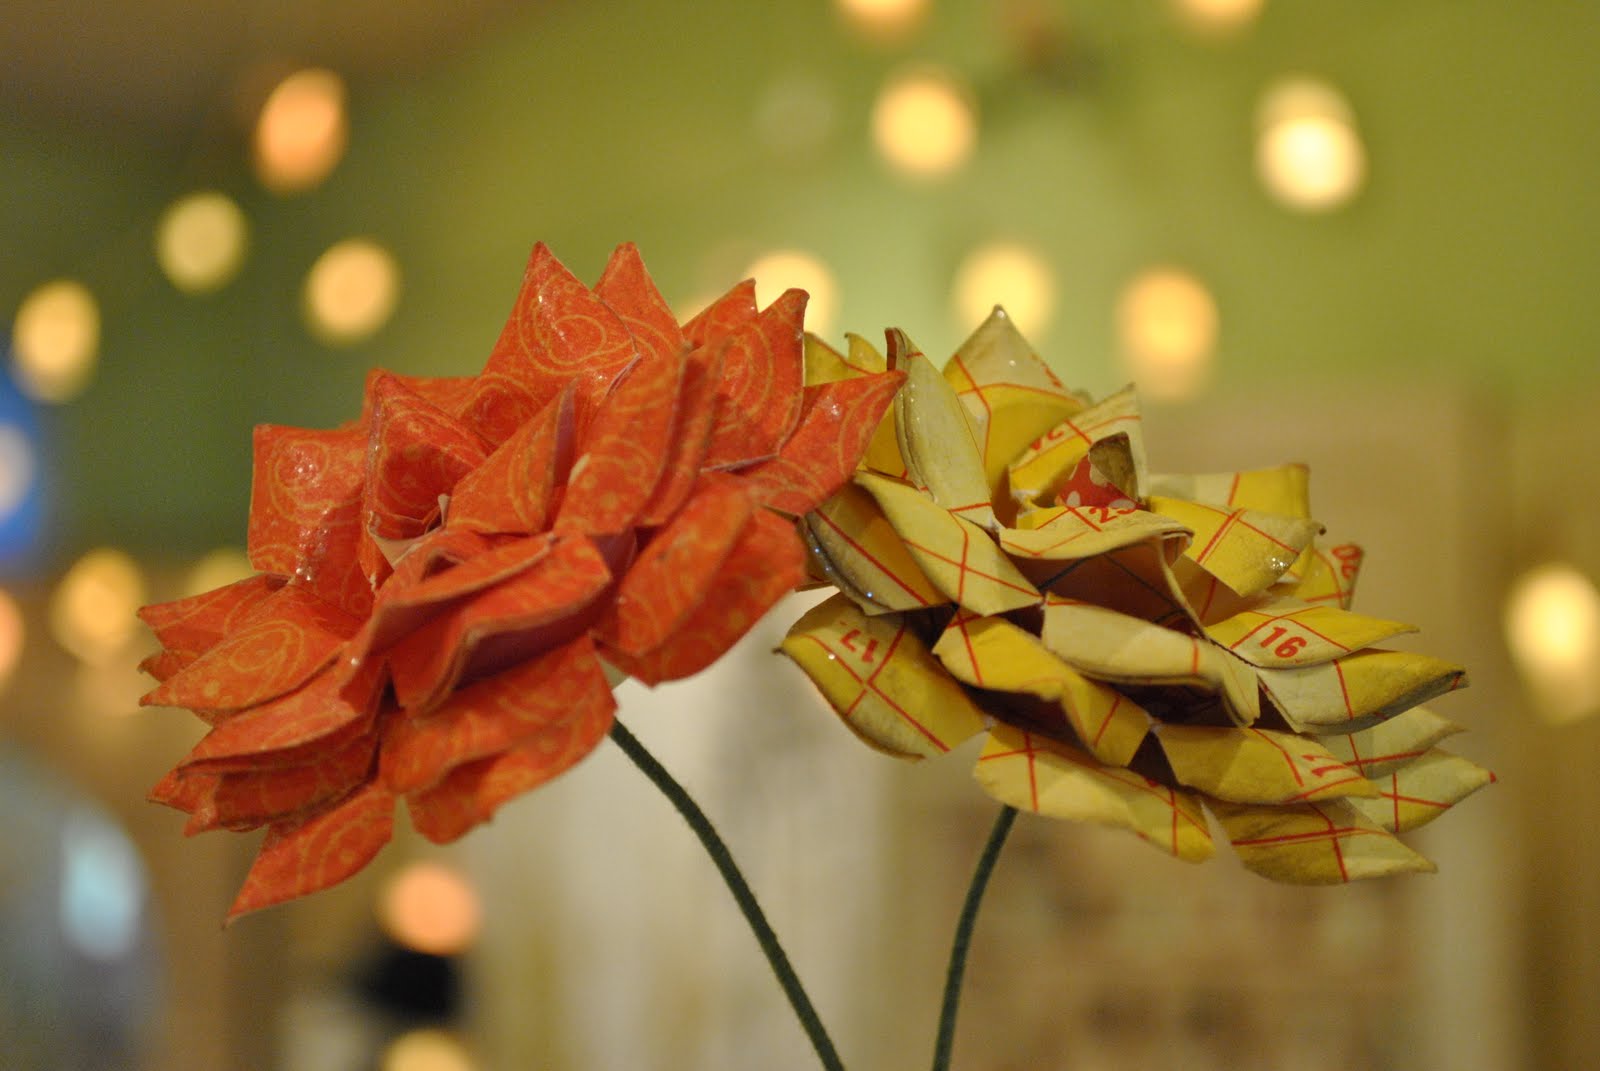 ... vintage paper flowers prove to be a top pick sculpted out of old paper